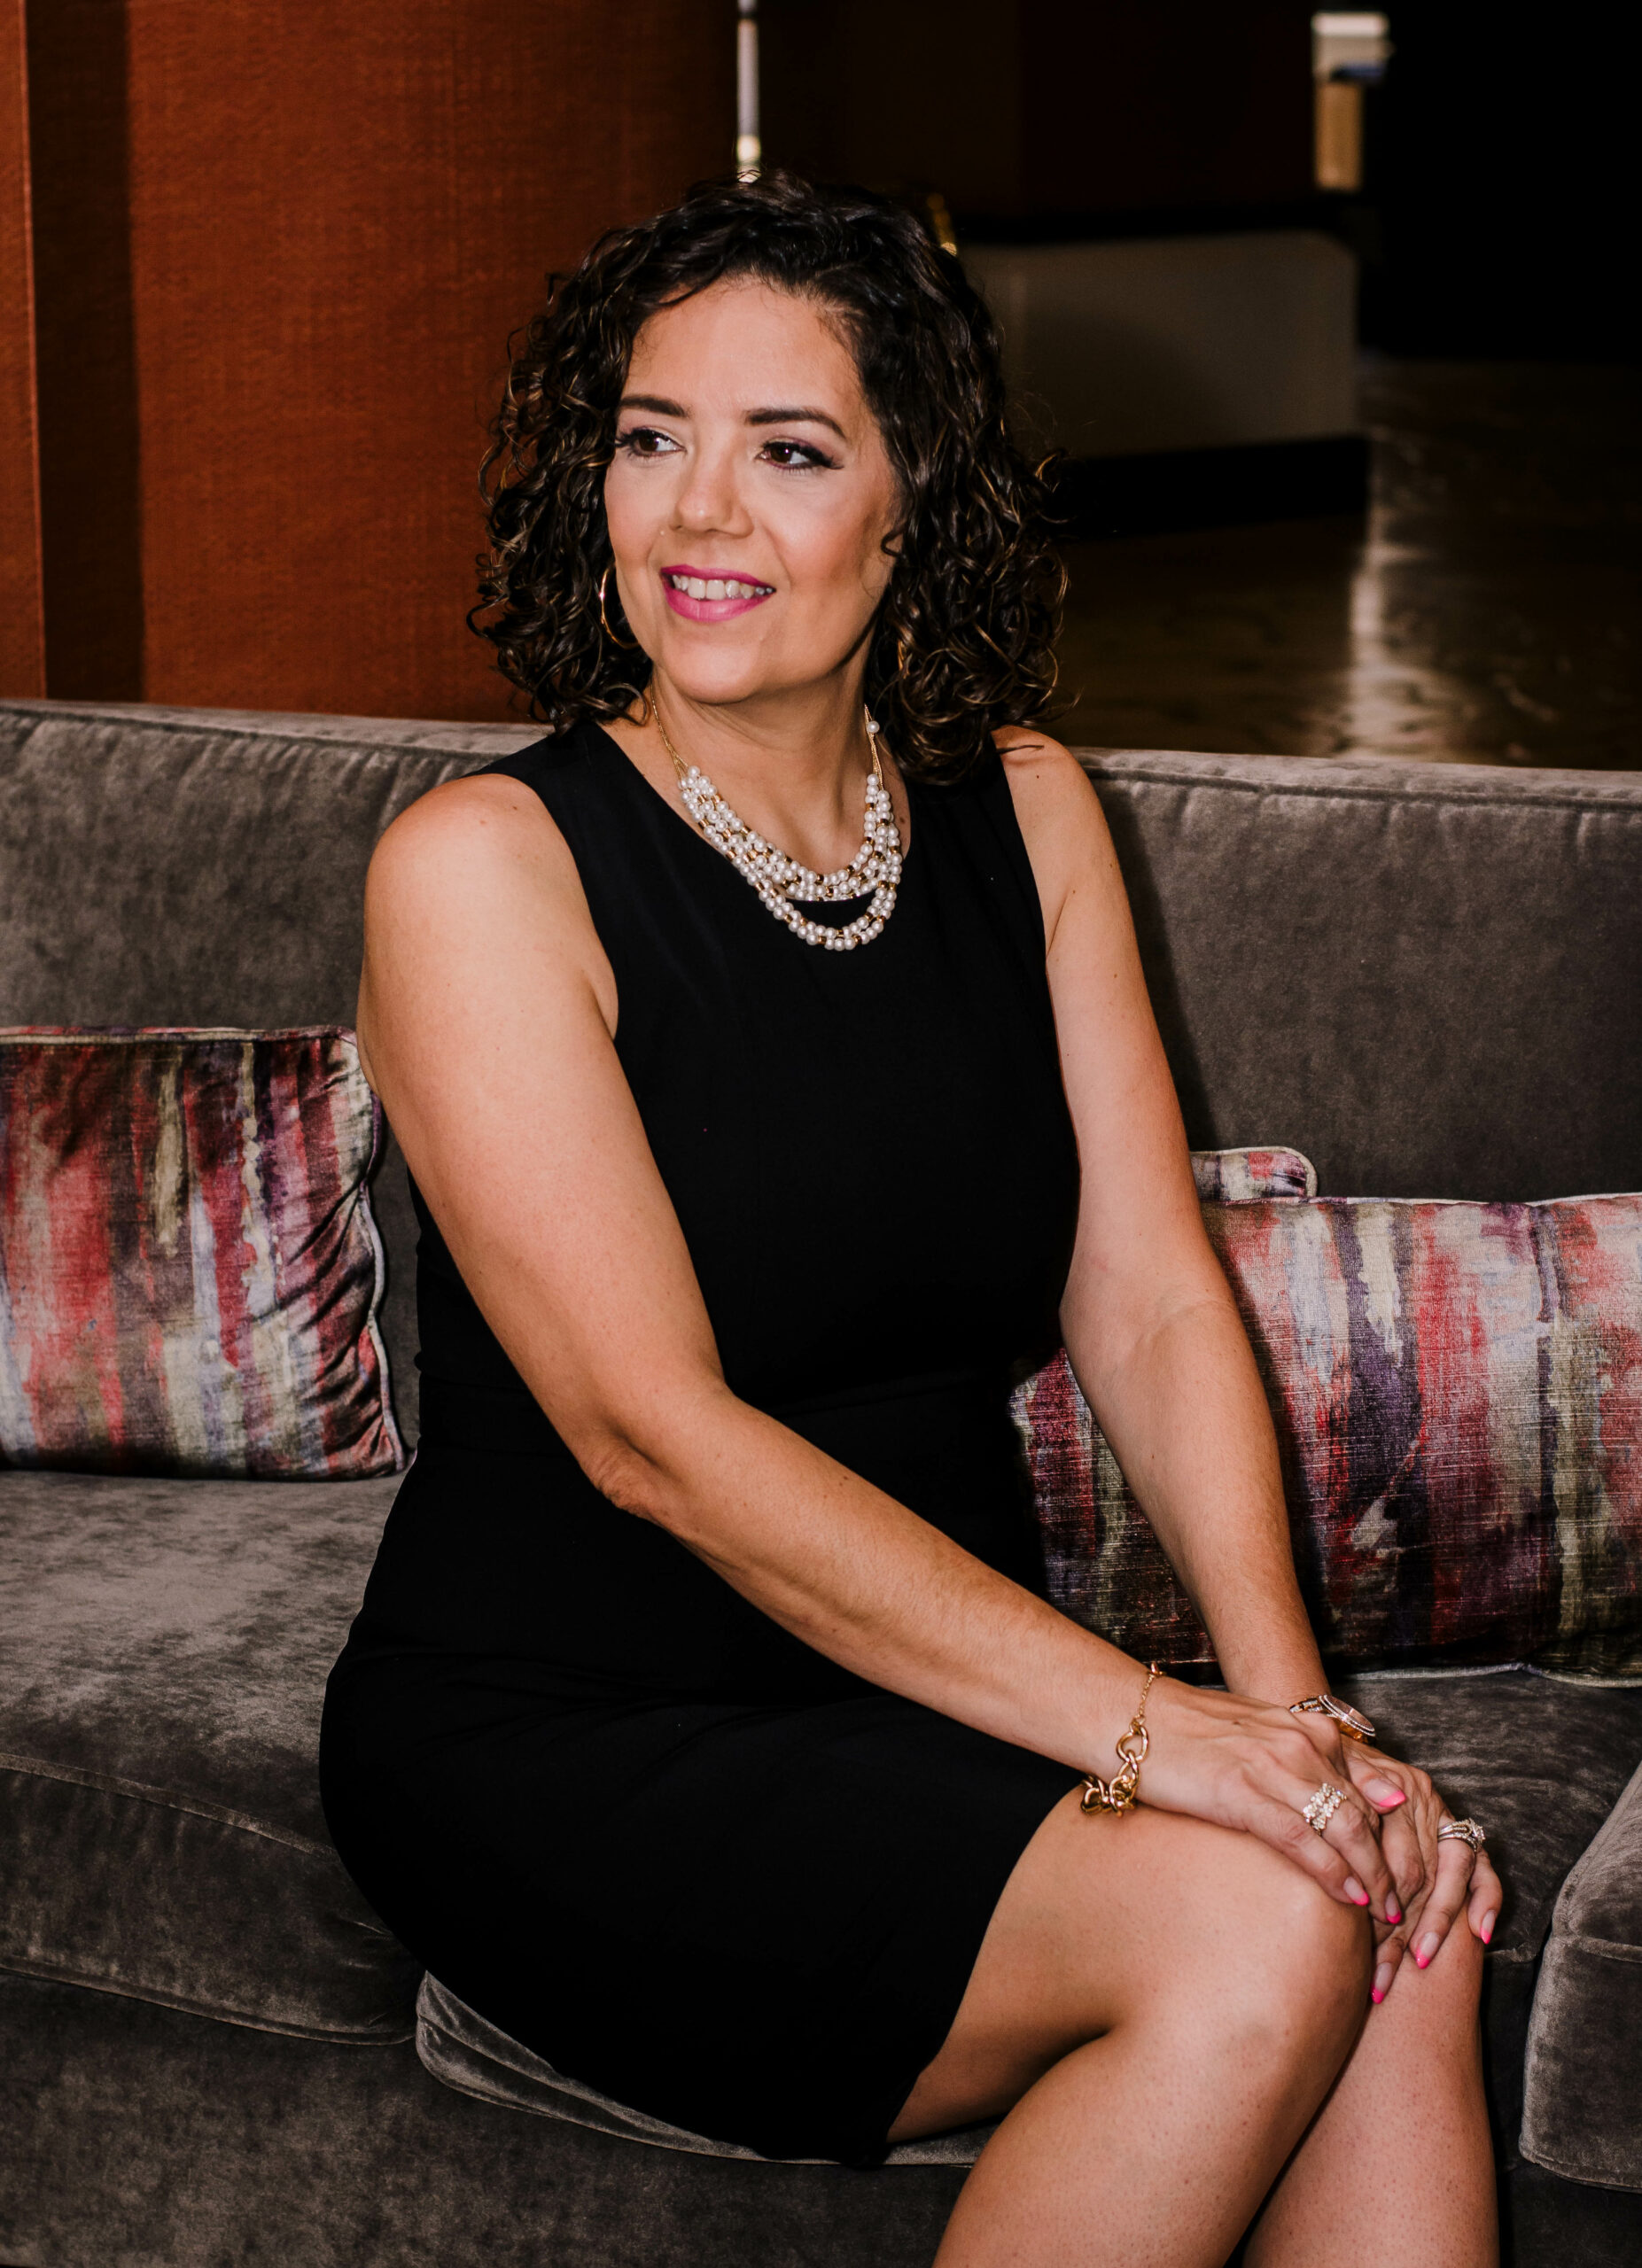 Portrait of Nancy Brown in a professional black dress, exuding confidence and expertise. This image represents the professionalism and competence of our business coaching services.